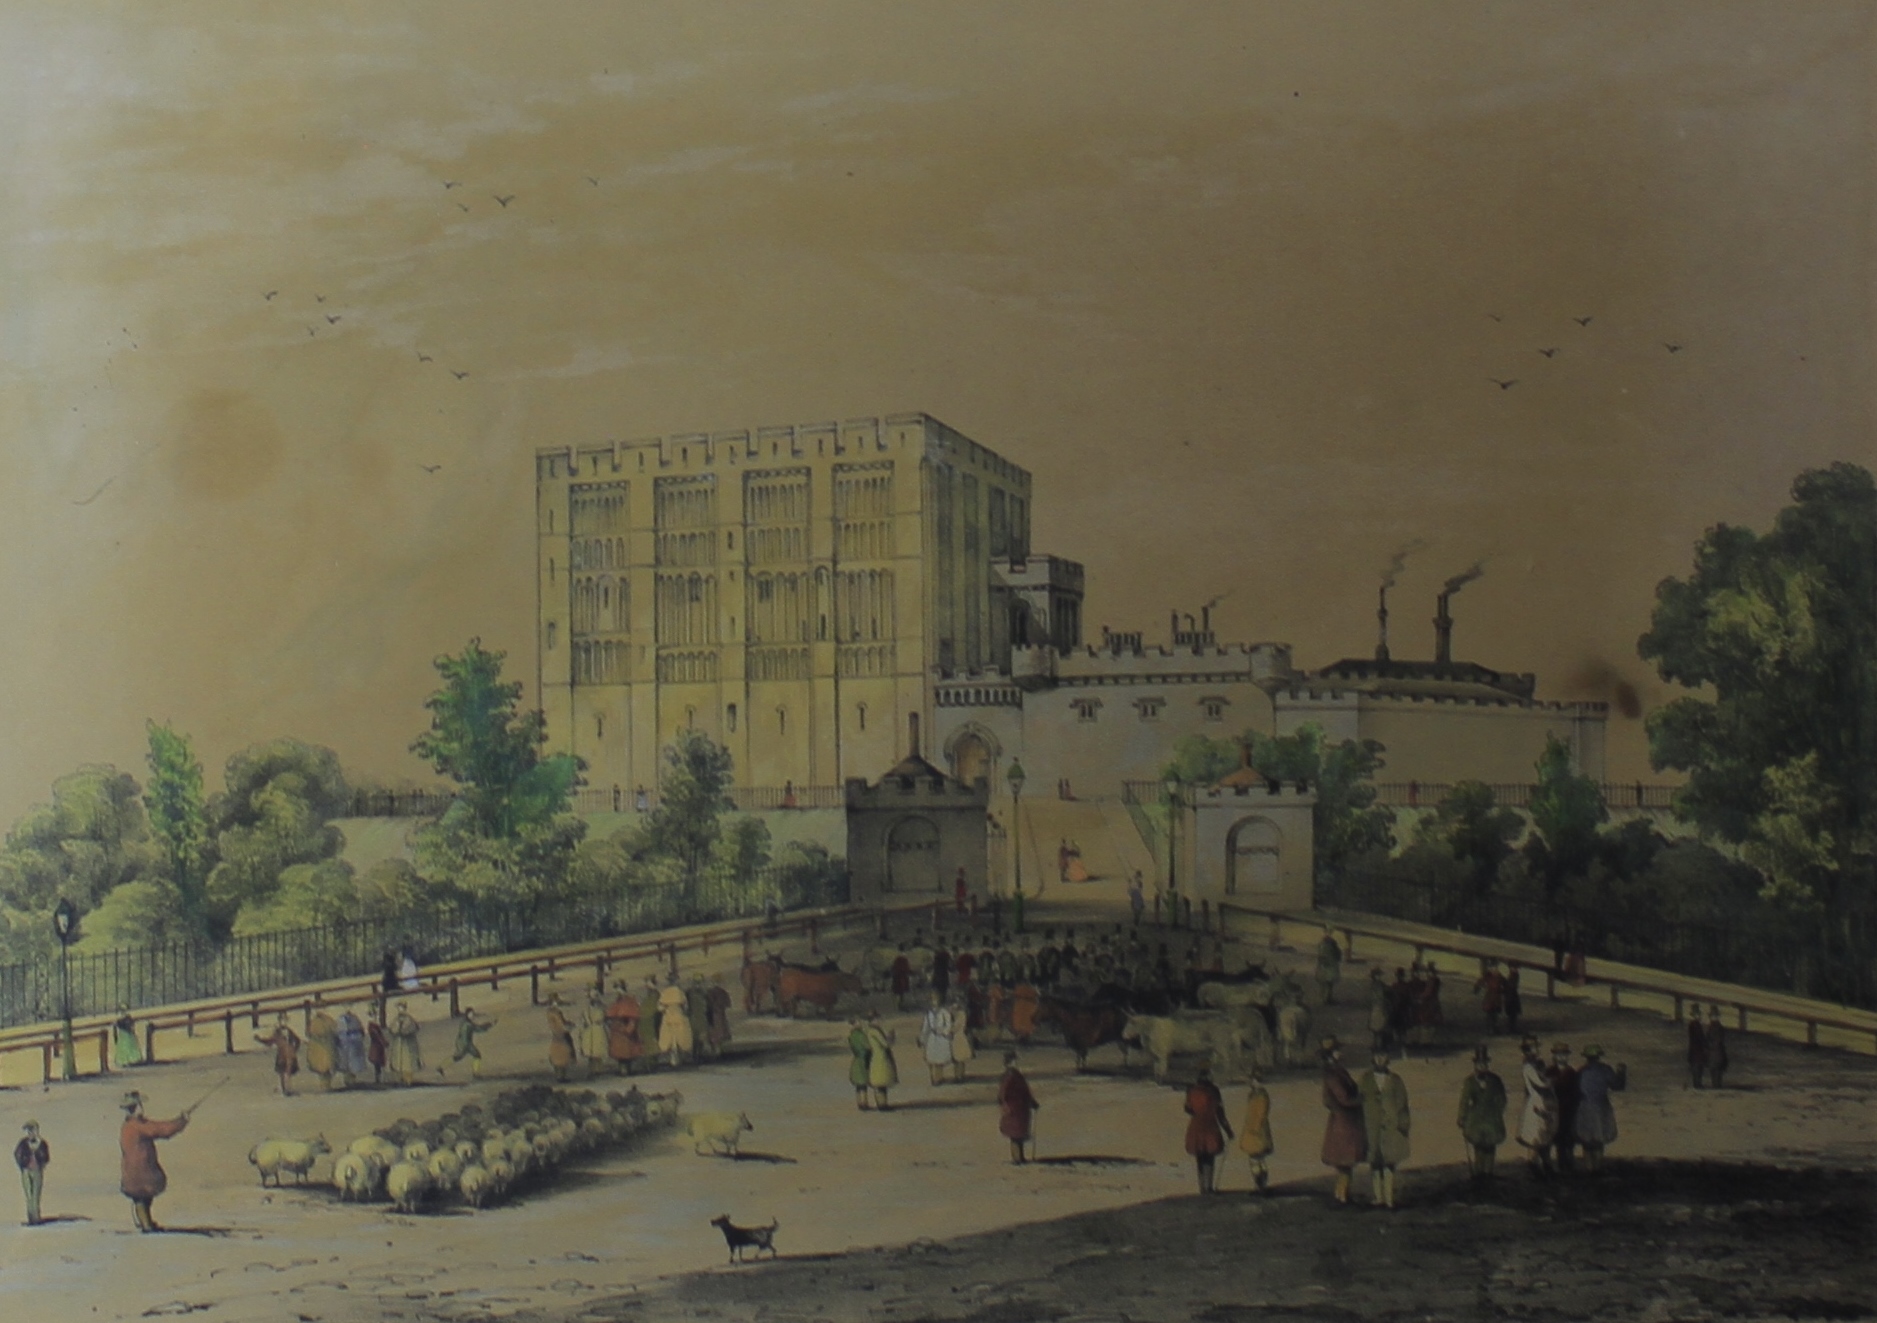 J Newman (19th Century, British, lithographer), "Norwich Castle", (with the Market in the